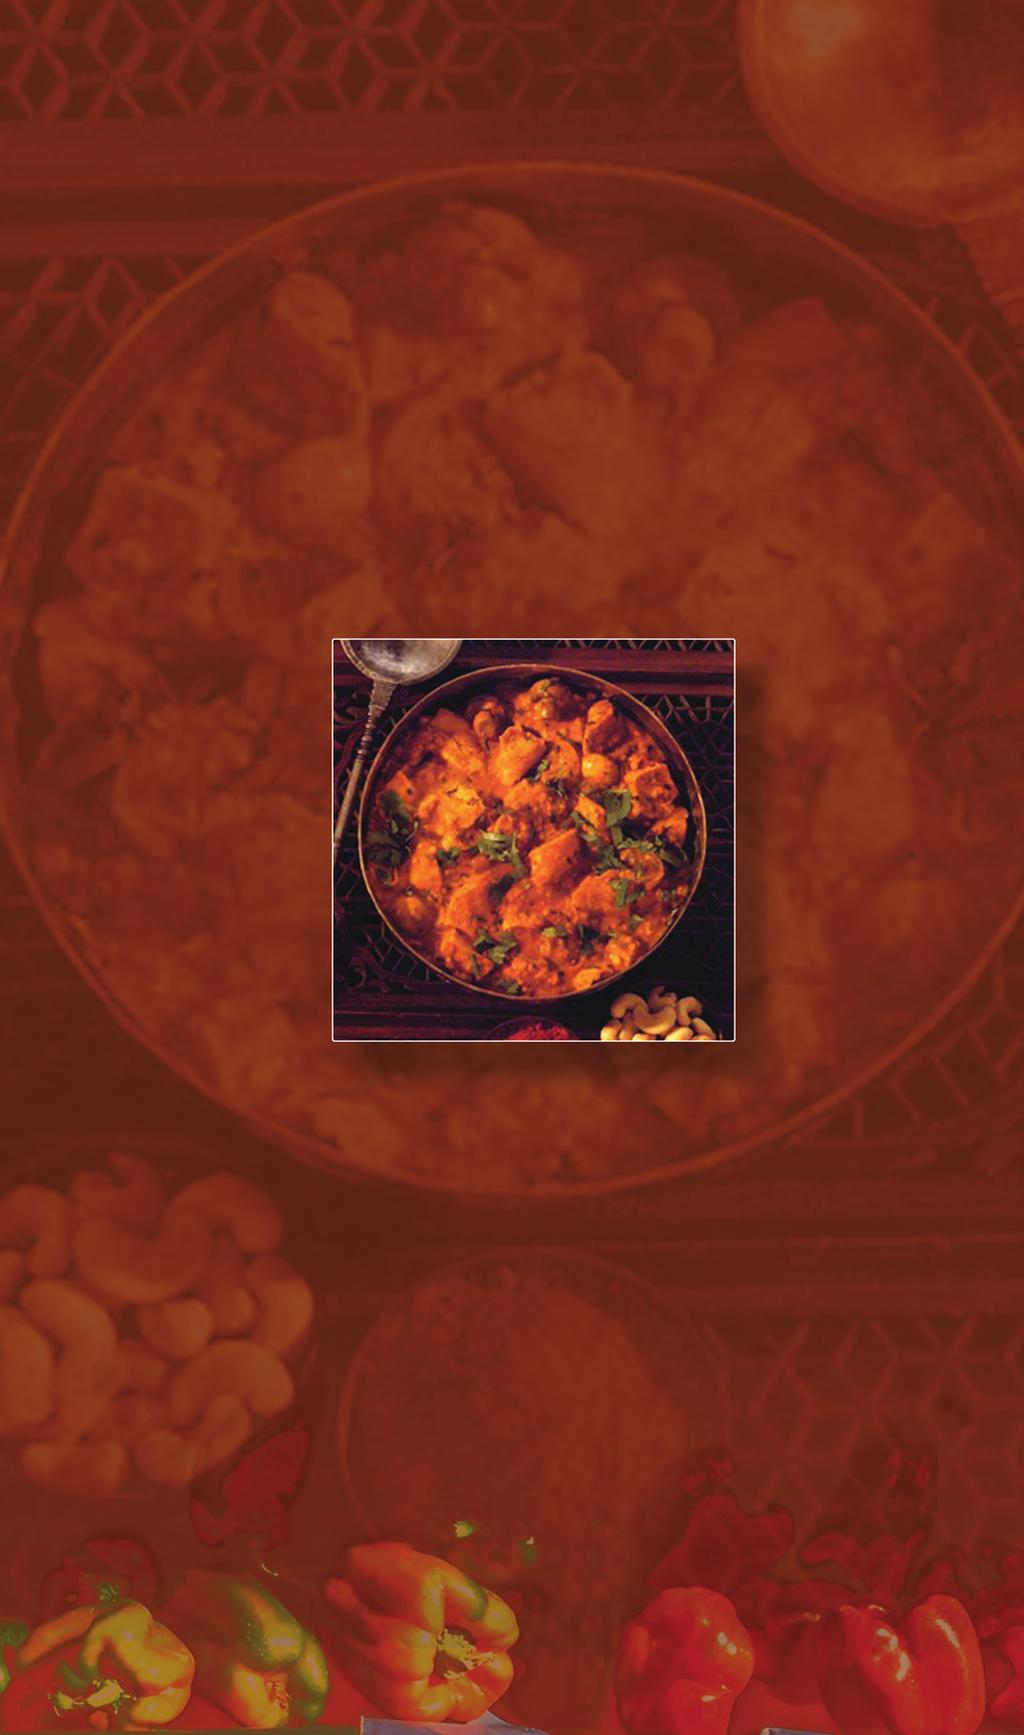 consistency produced from a wide range of oriental spices, giving a full and richer Eastern flavour. Medium strength for those who enjoy to taste all the flavours.